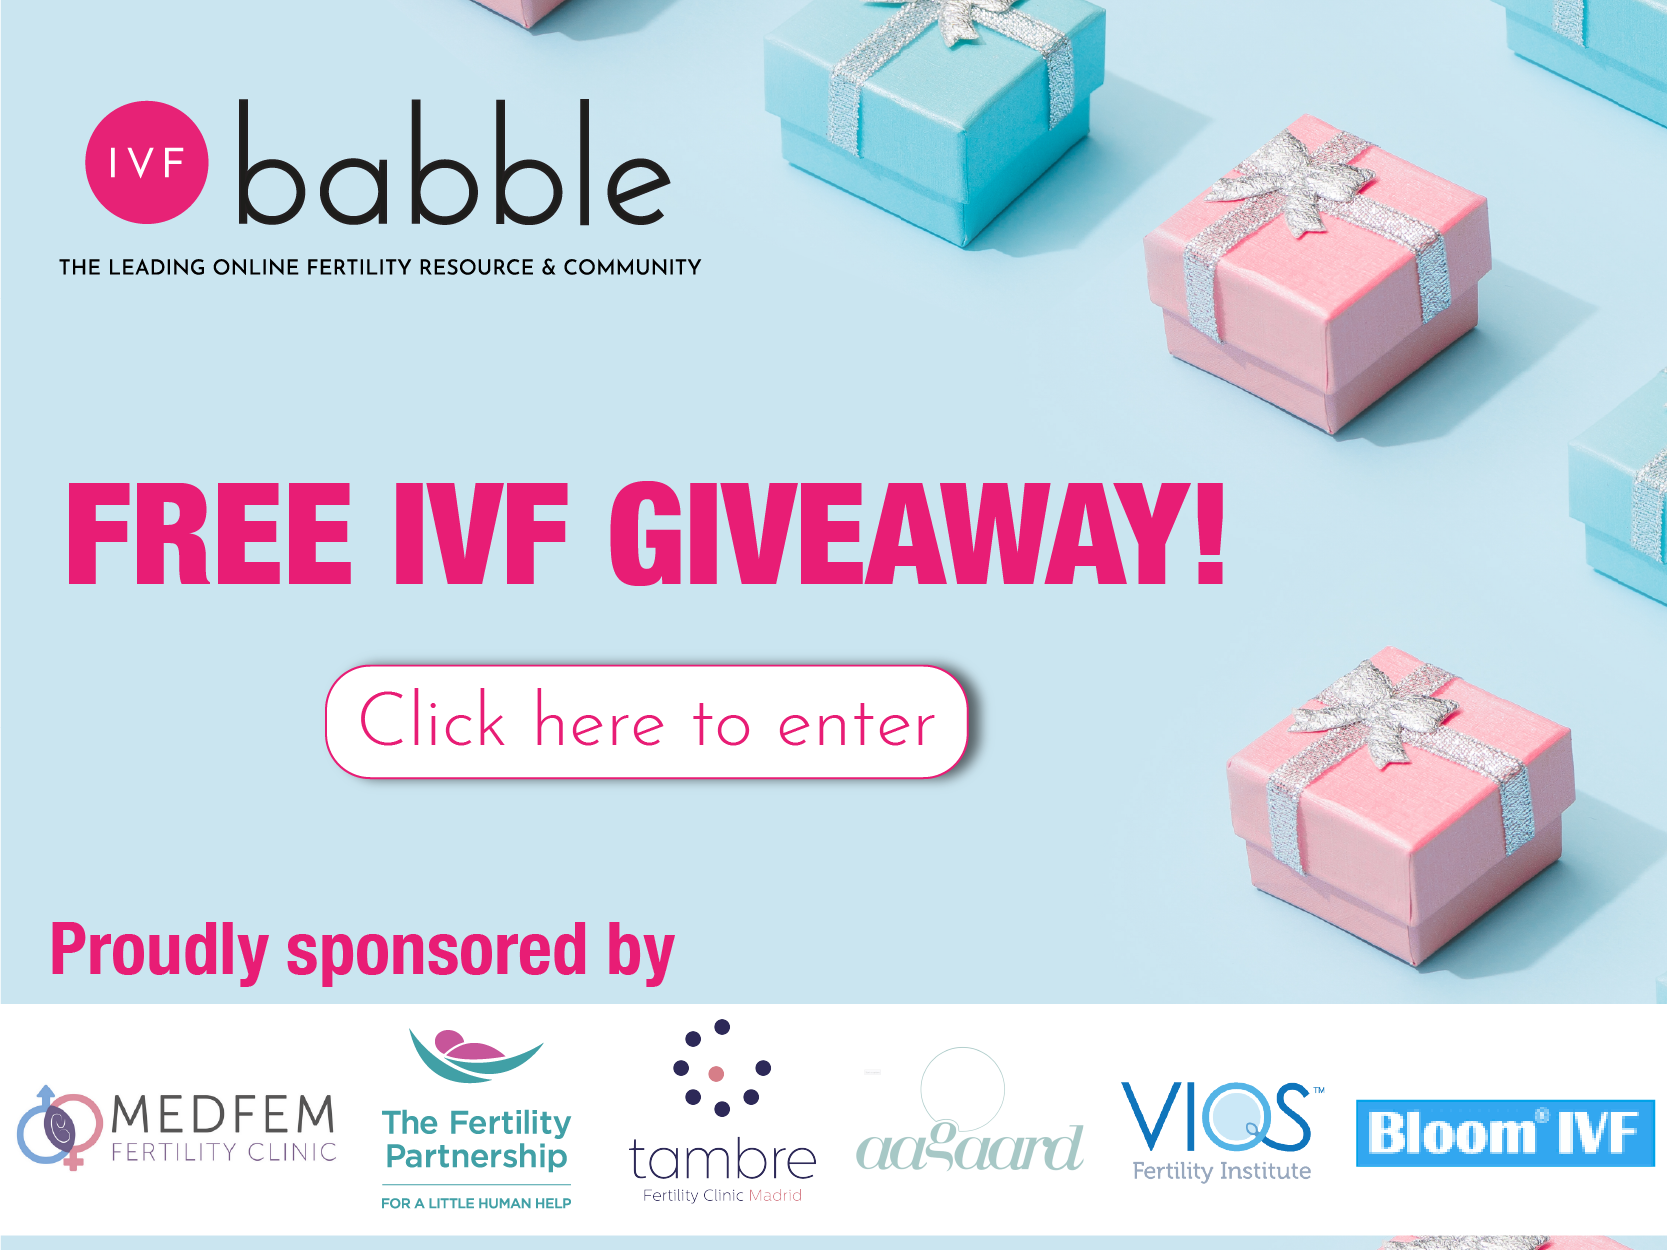 Free-IVF-2021-Banners-800x600-and-1170x145-banners-01.png